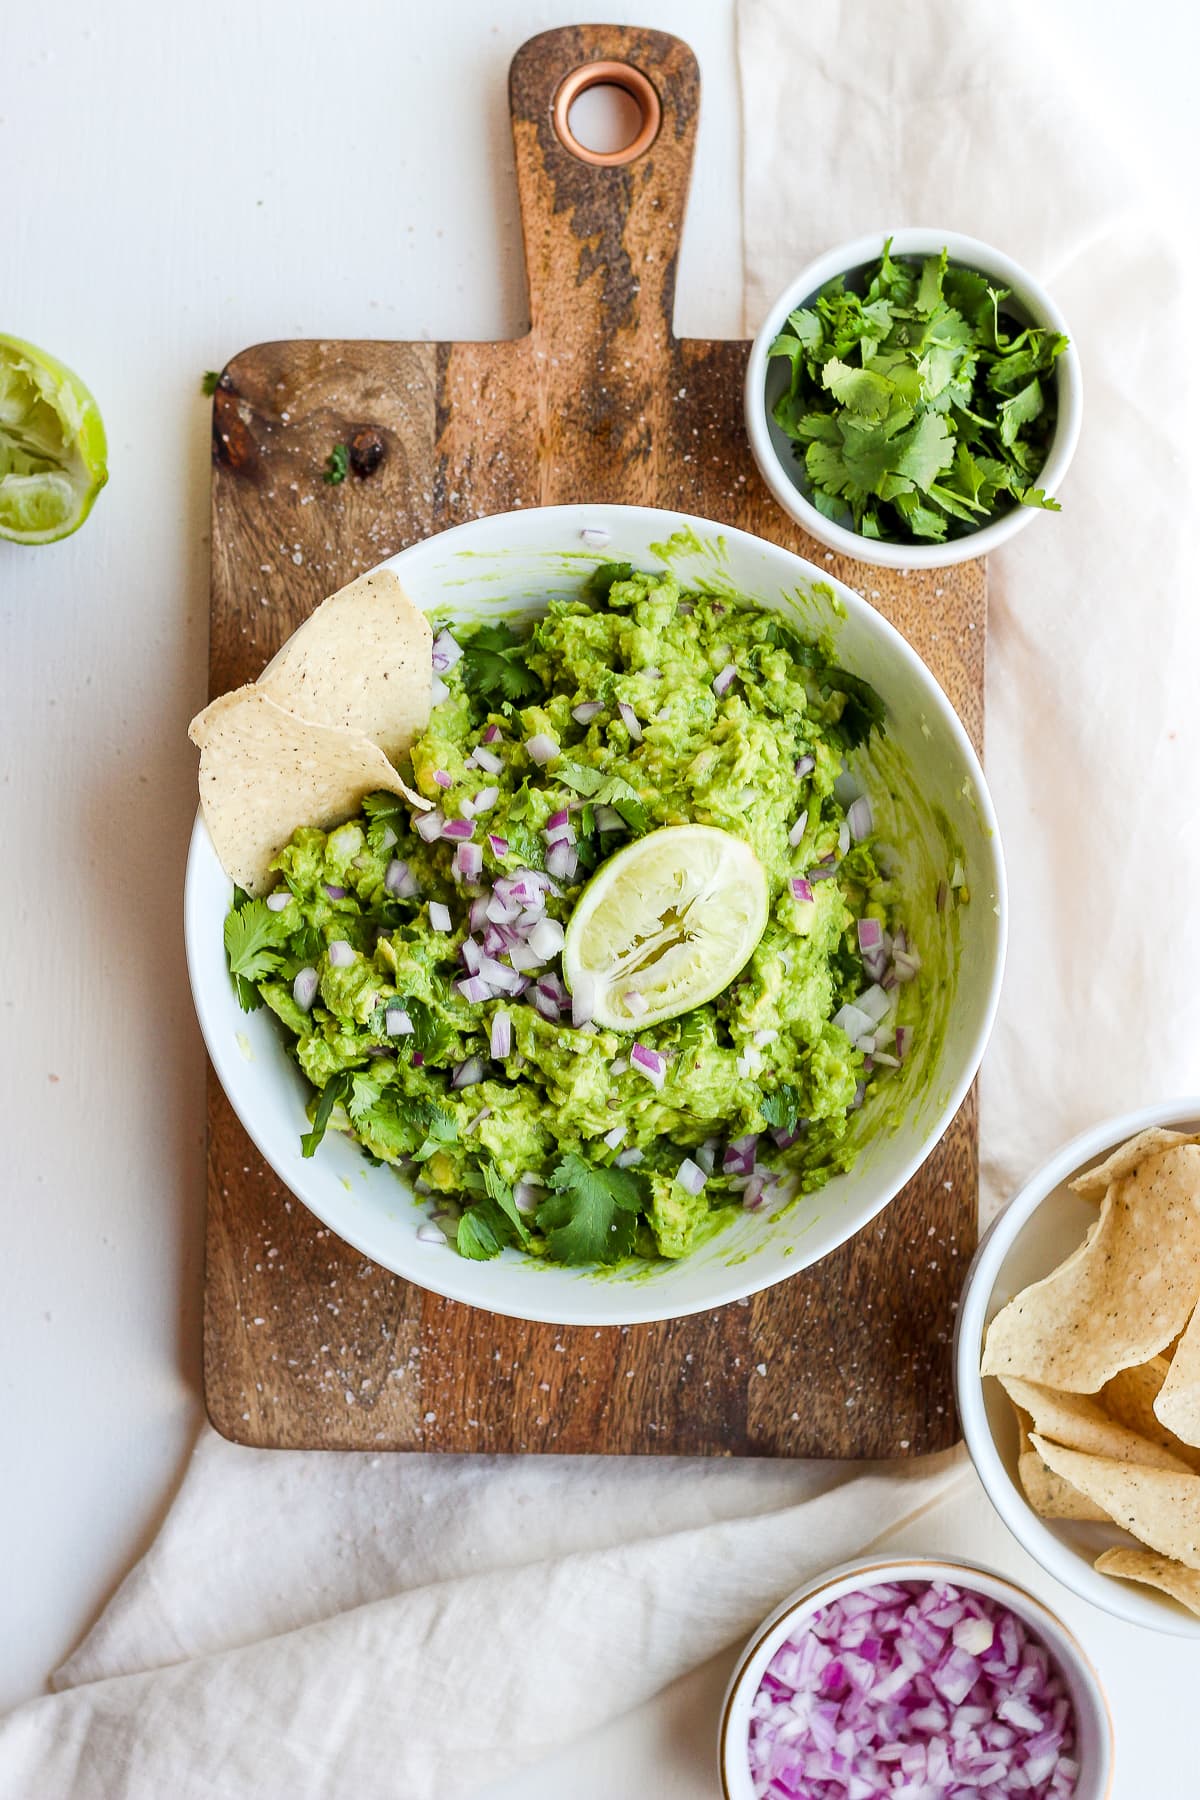 A bowl of guacamole with some tortilla chips.